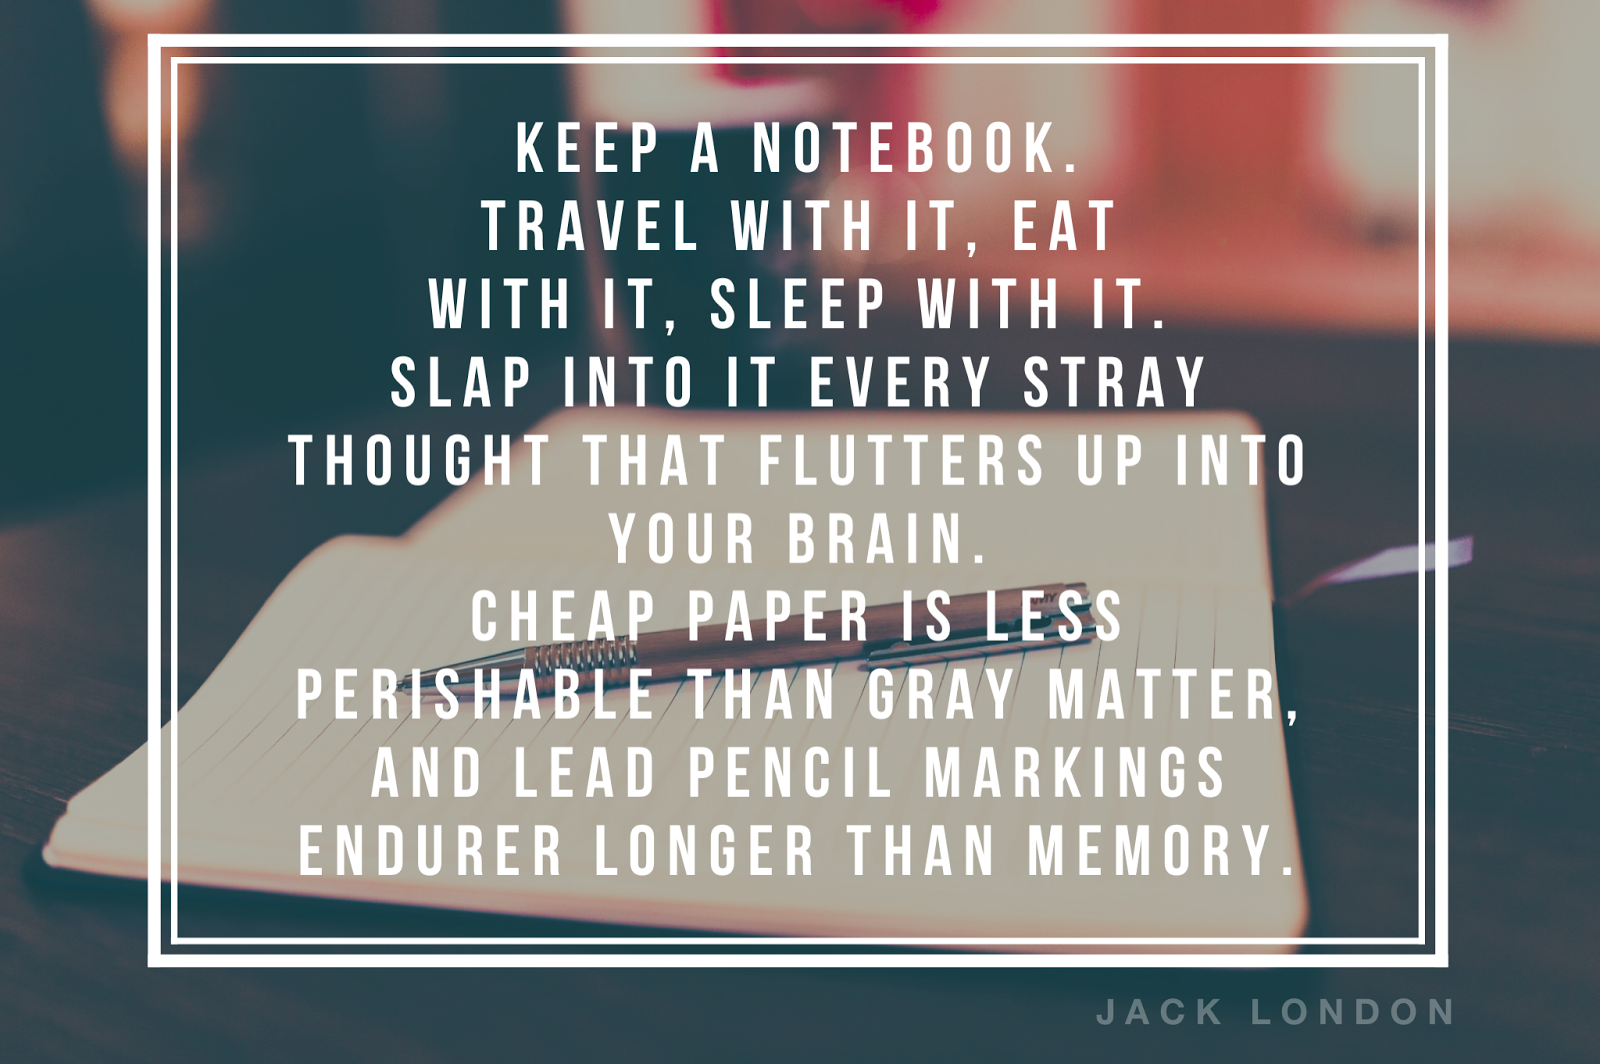 jack london notebook quote